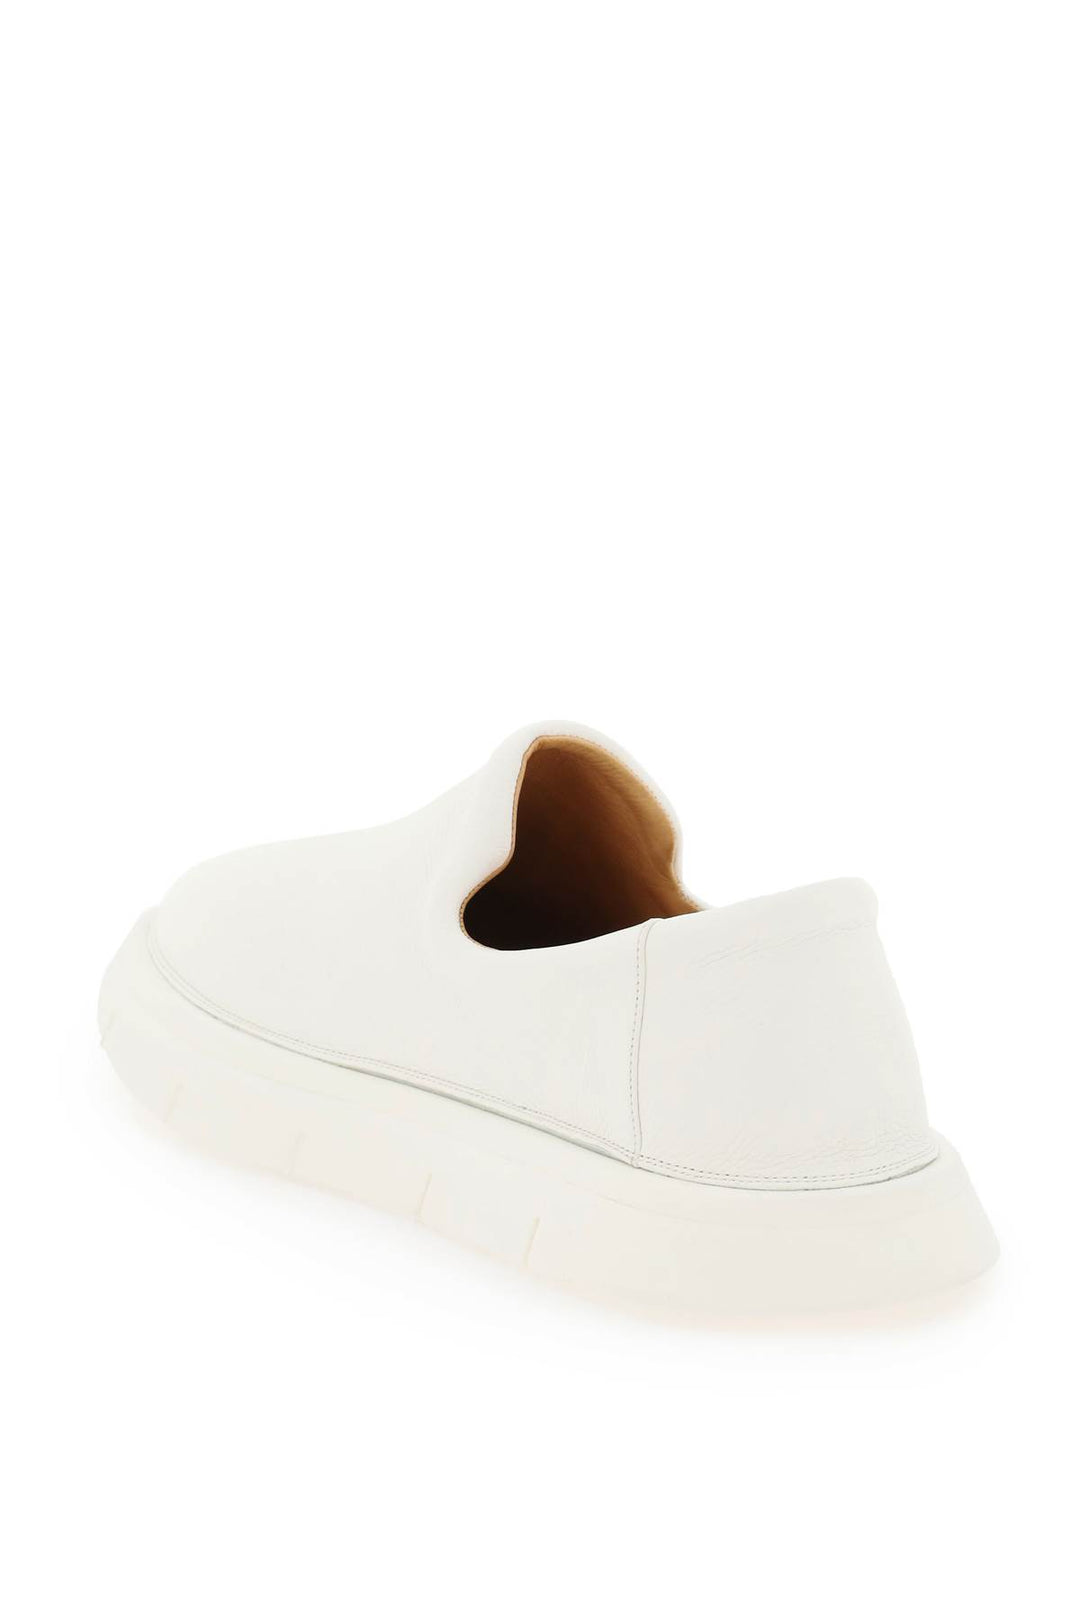 Marsell 'Intagliata' Grained Leather Slip On Shoes   Bianco